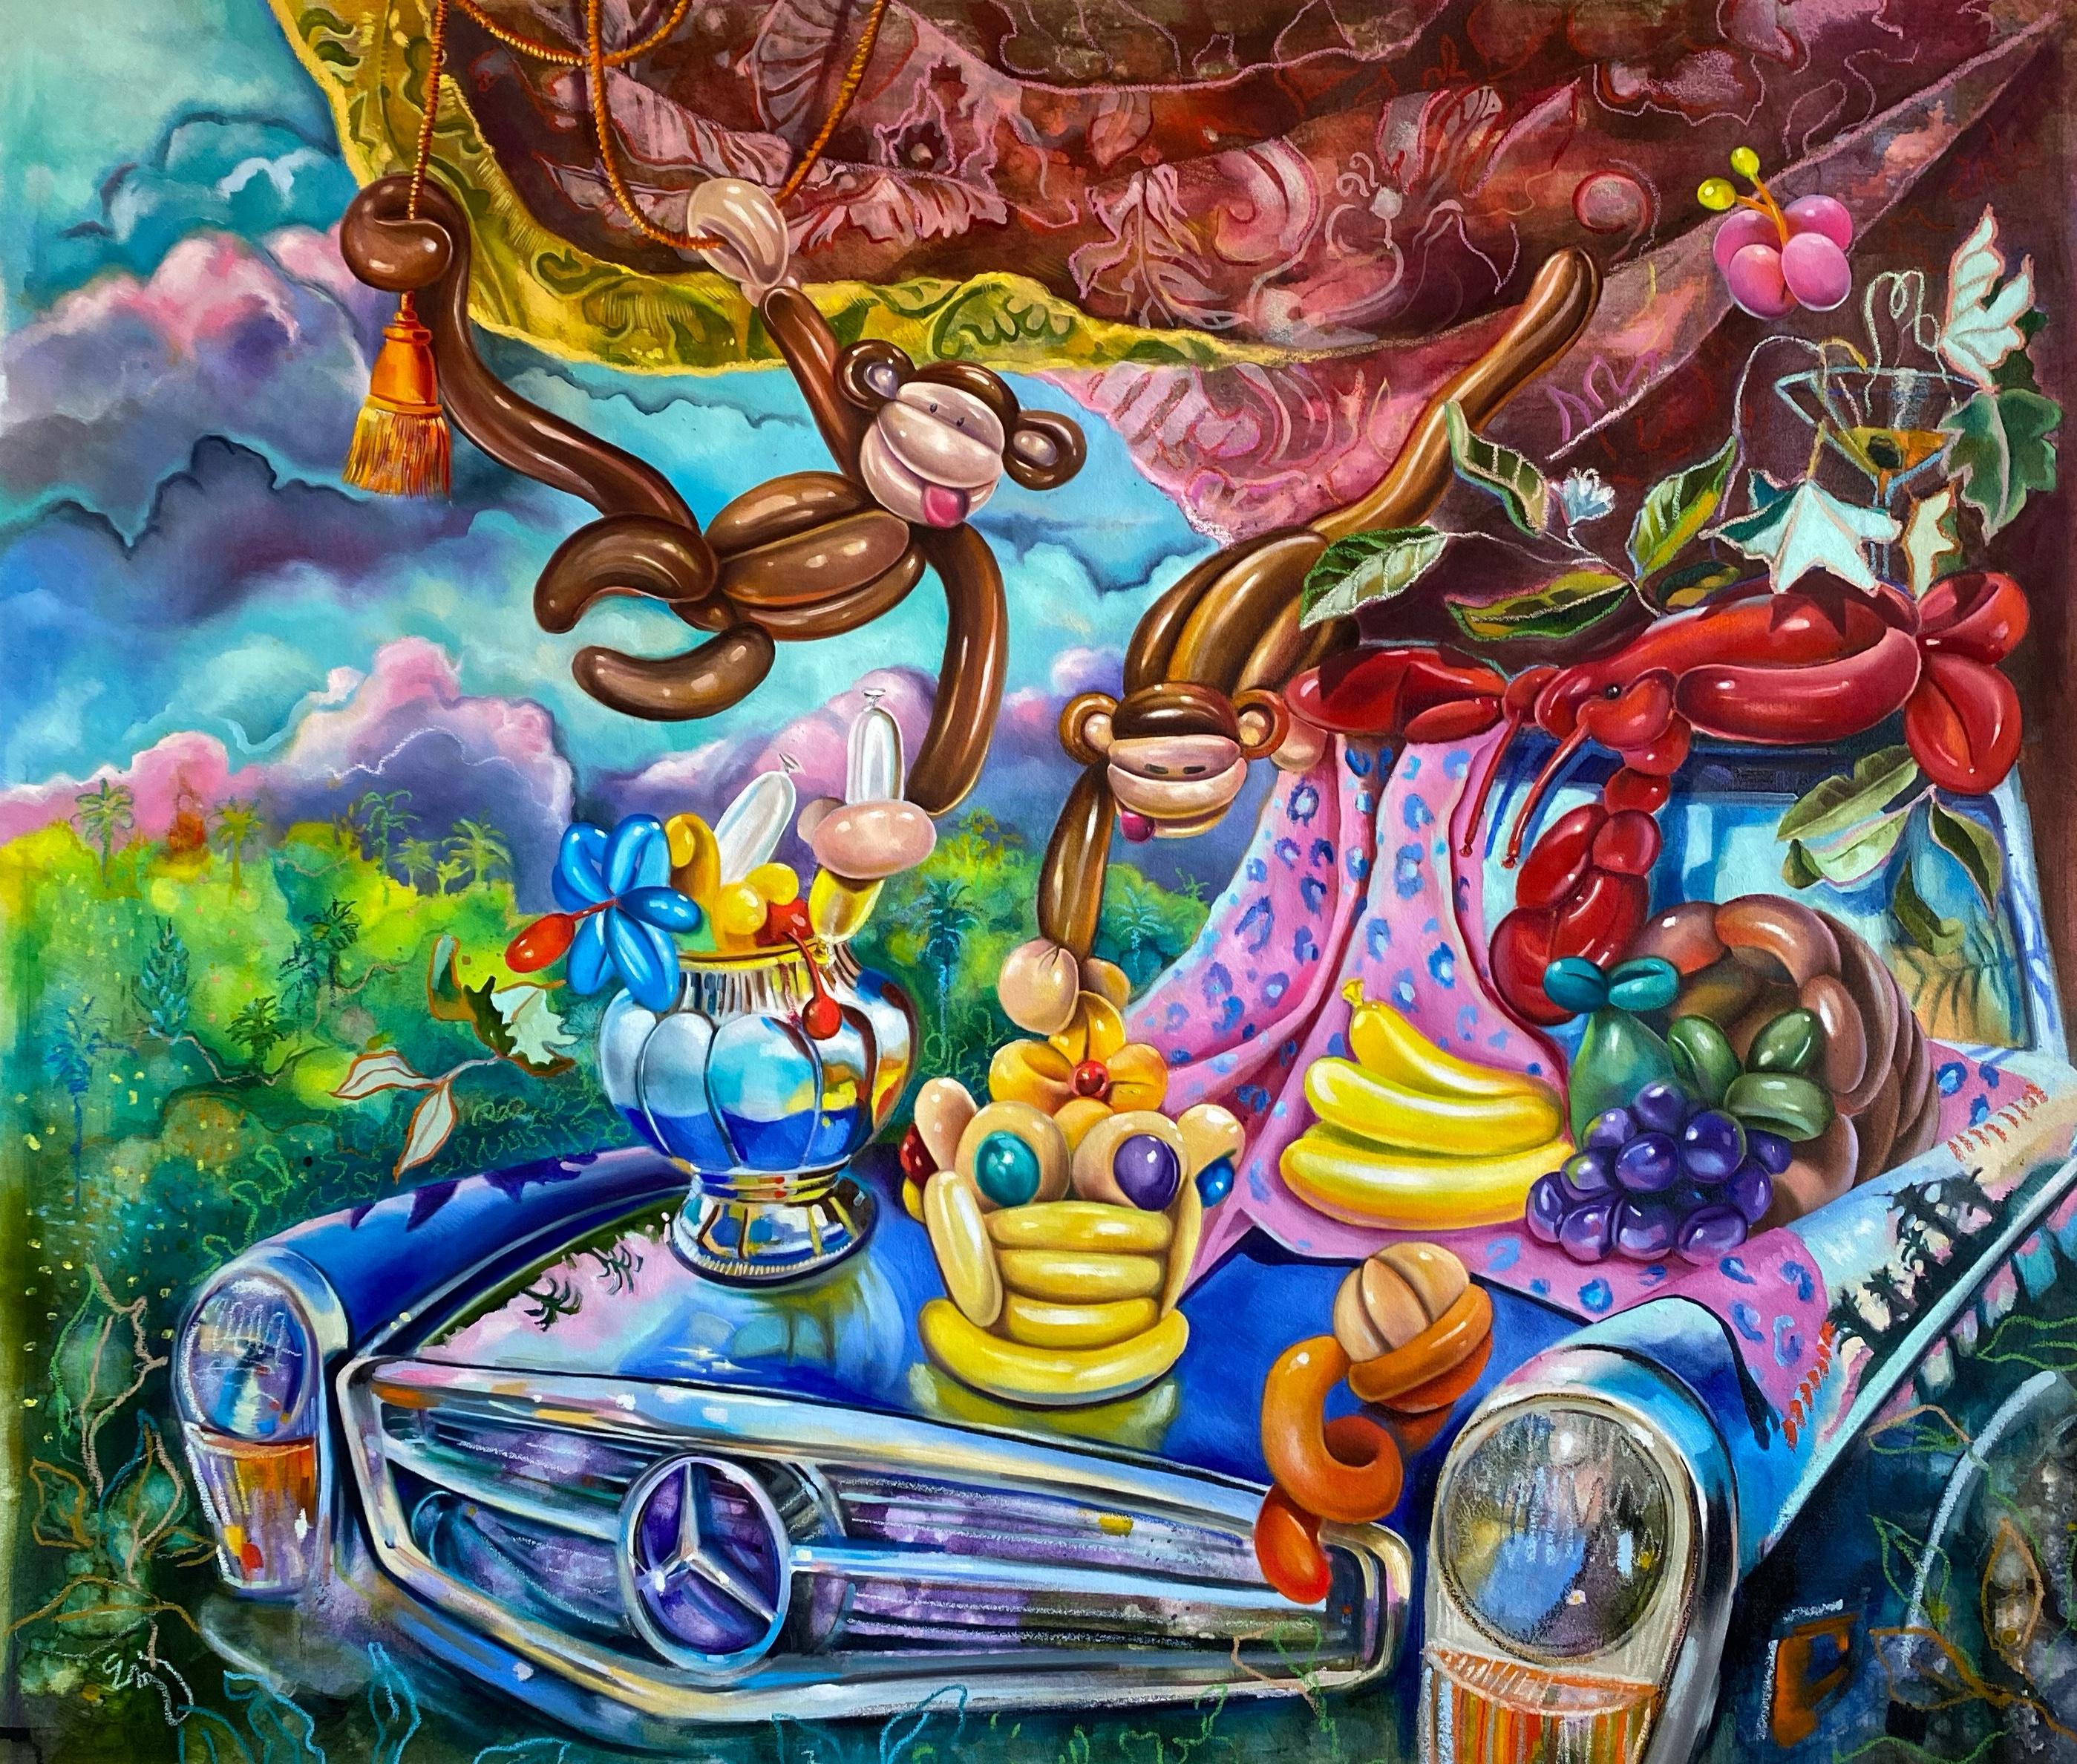 THE REVOLUTION - bold, colorful surrealist painting with balloon animals- monkey